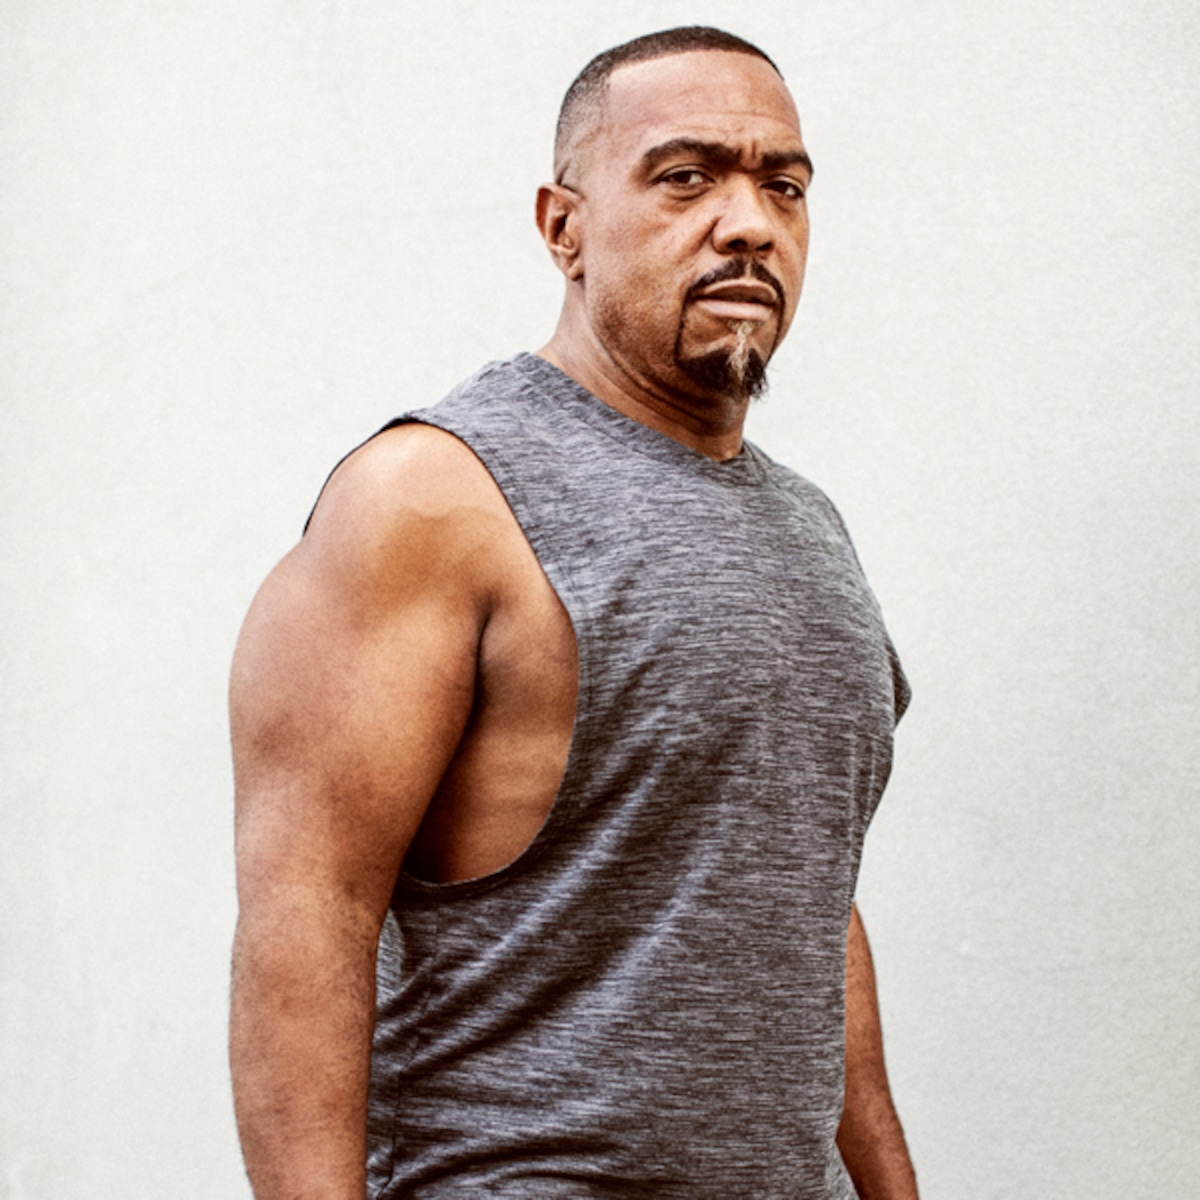 Shetland bon pizza How Timbaland Lost 130 Pounds After Near-Death Nightmare - E! Online